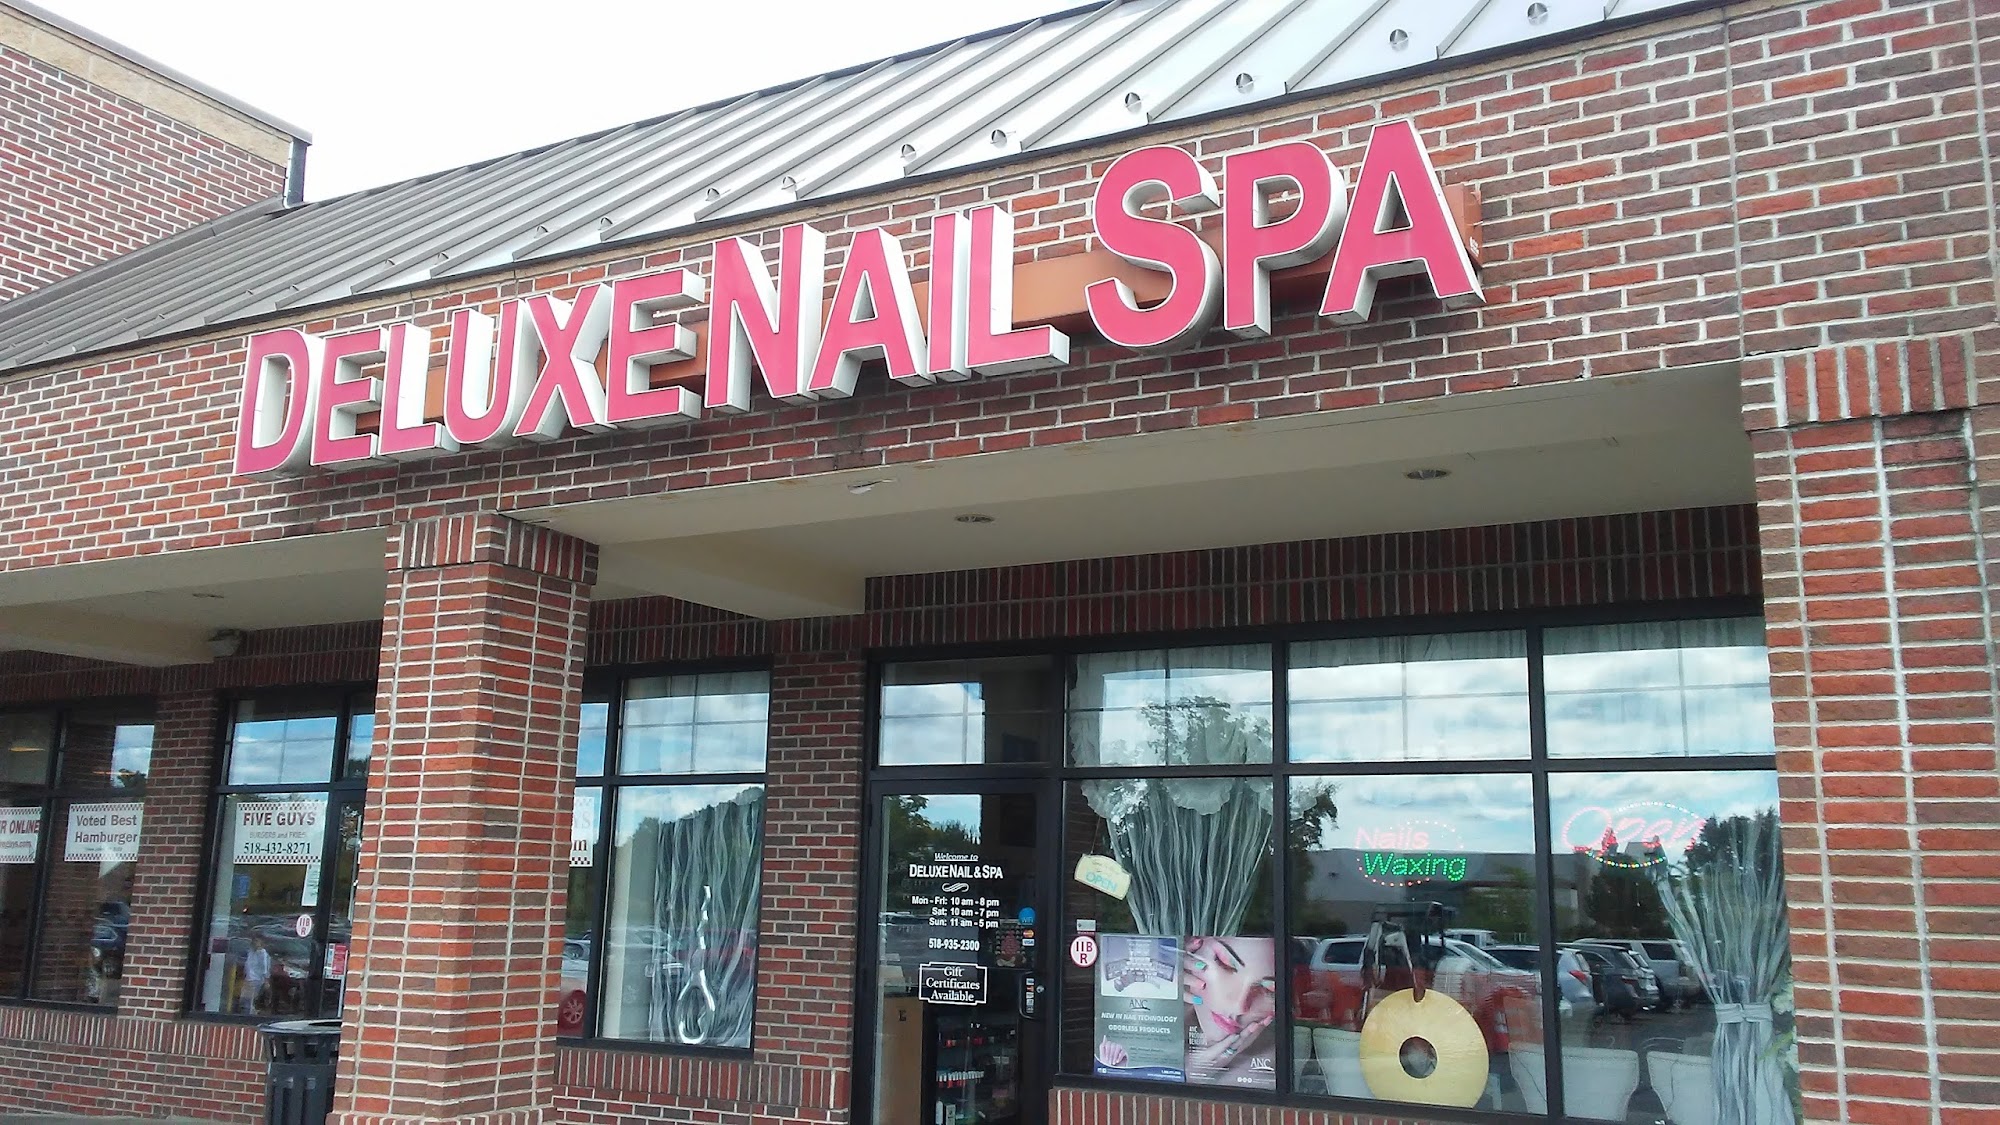 Deluxe Nail & Spa